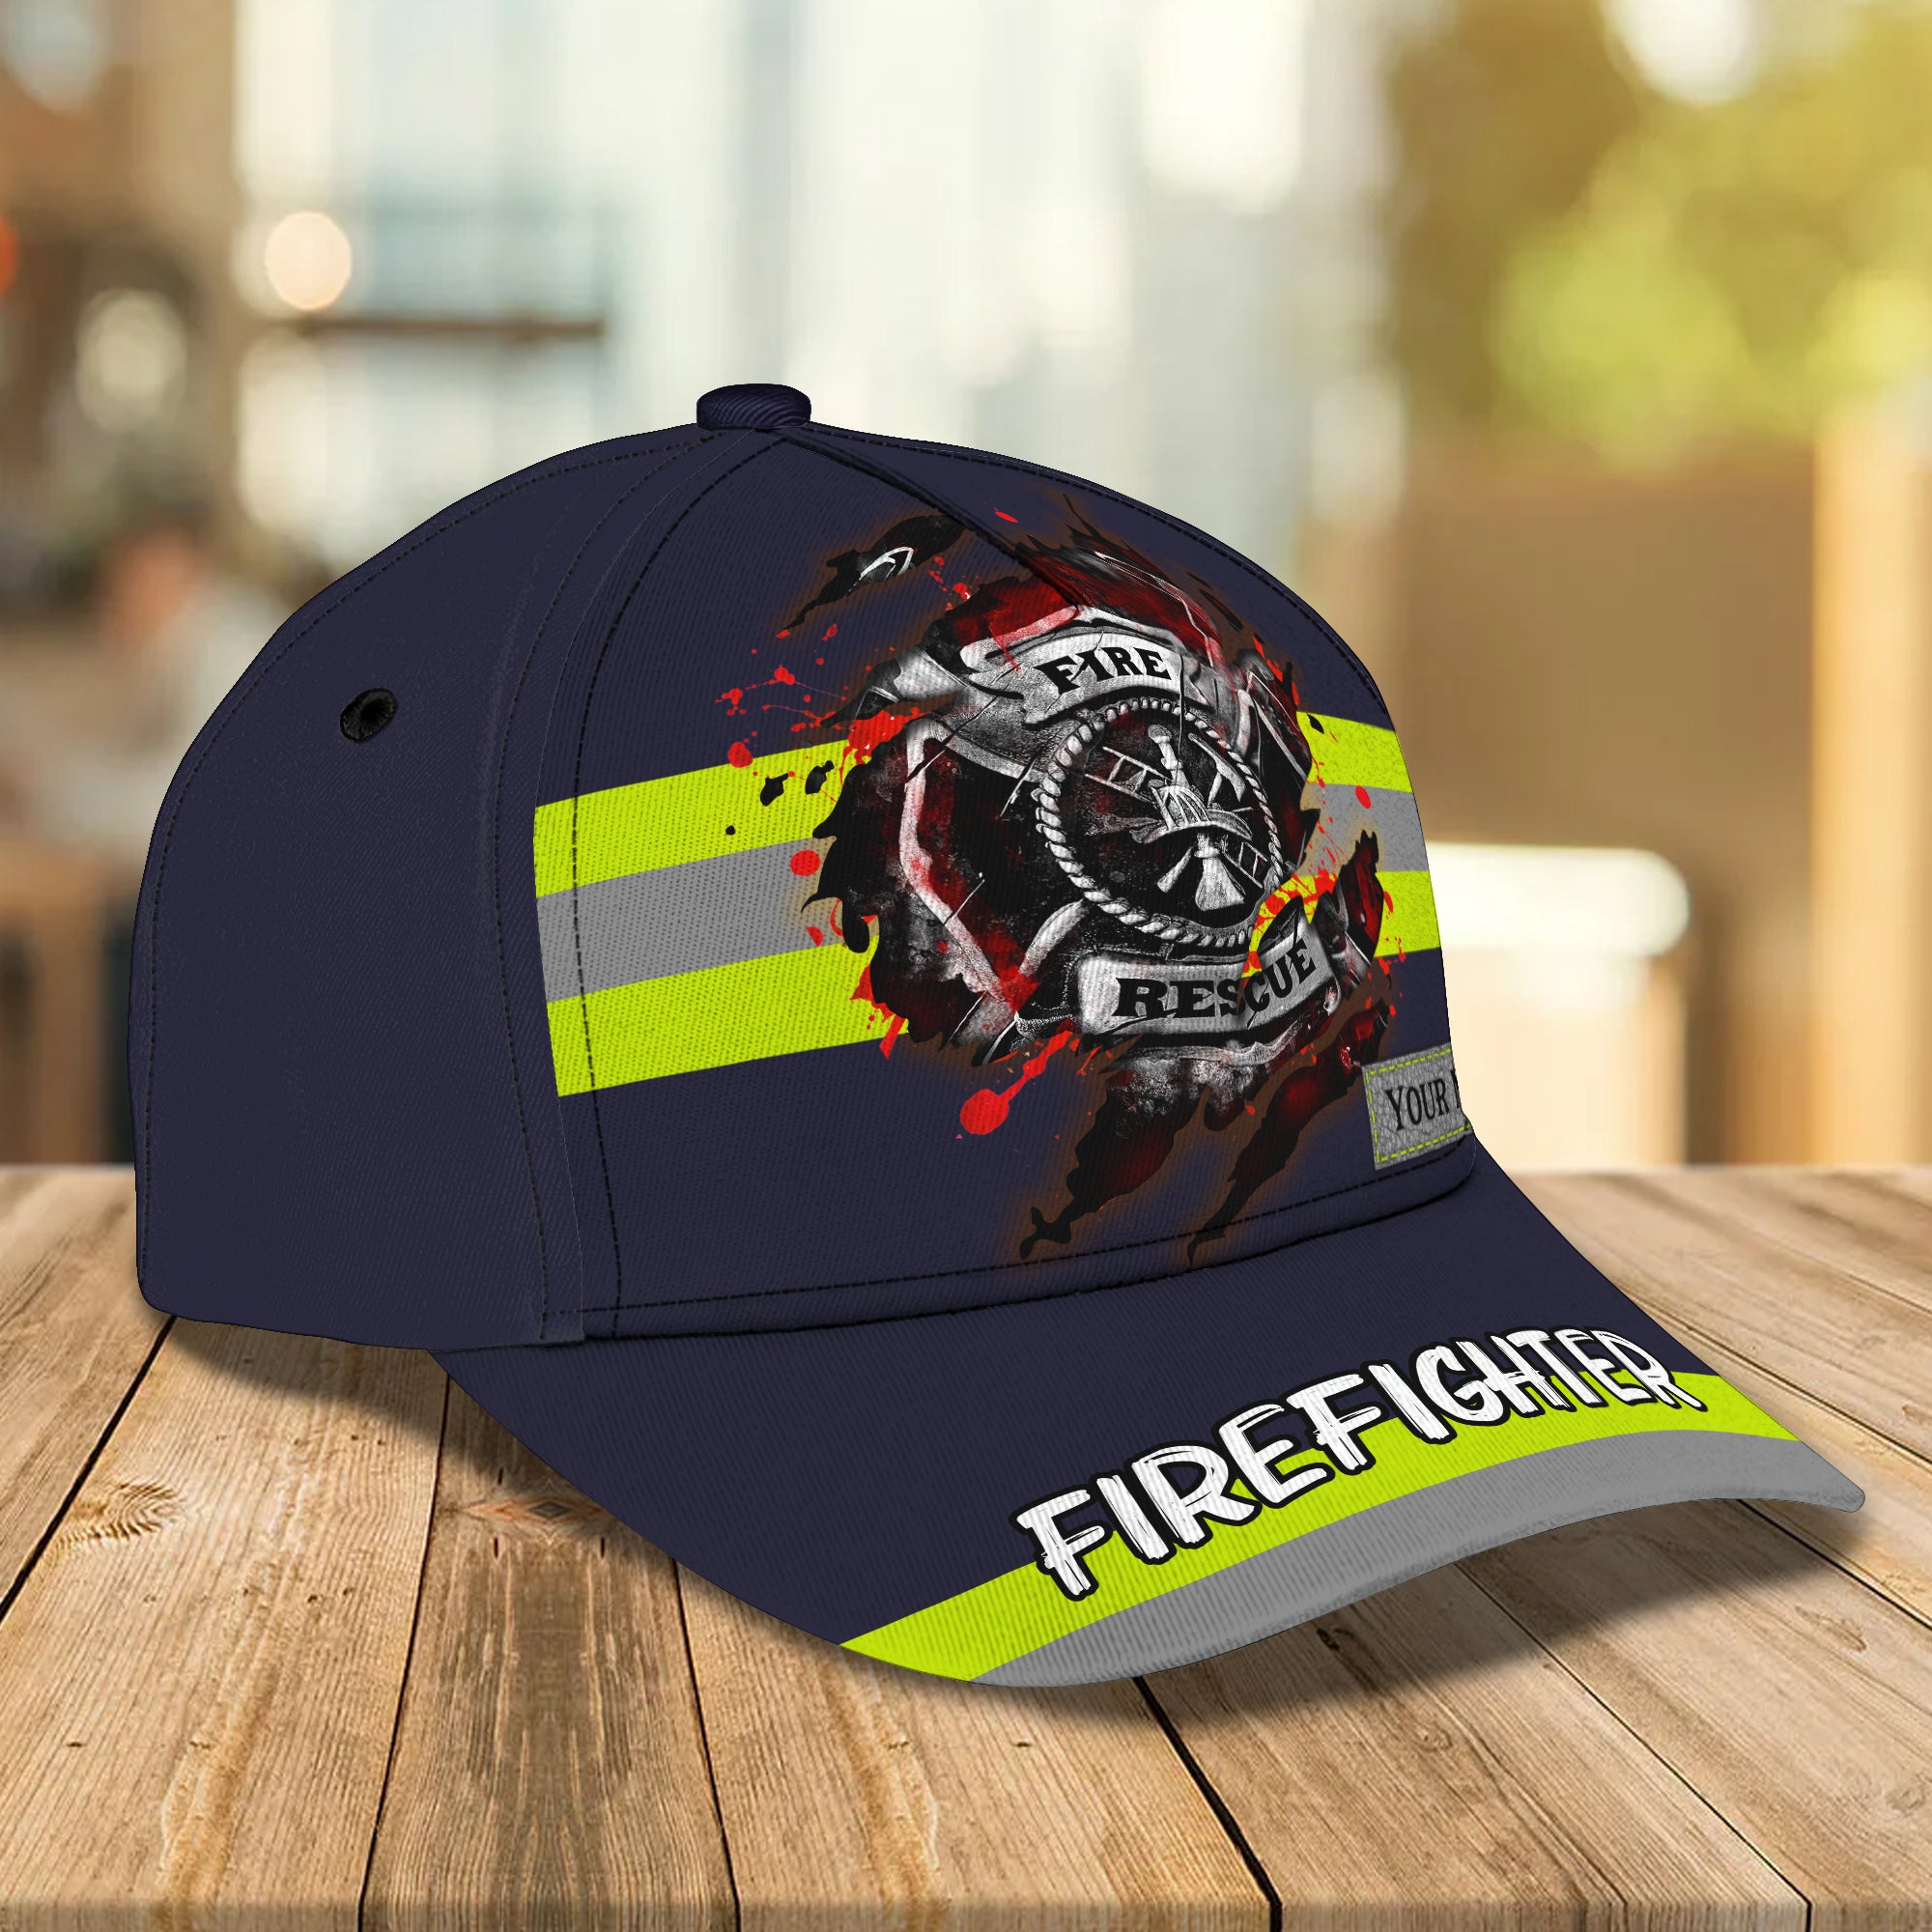 Firefighter - Personalized Name Cap 27 - Nvc97